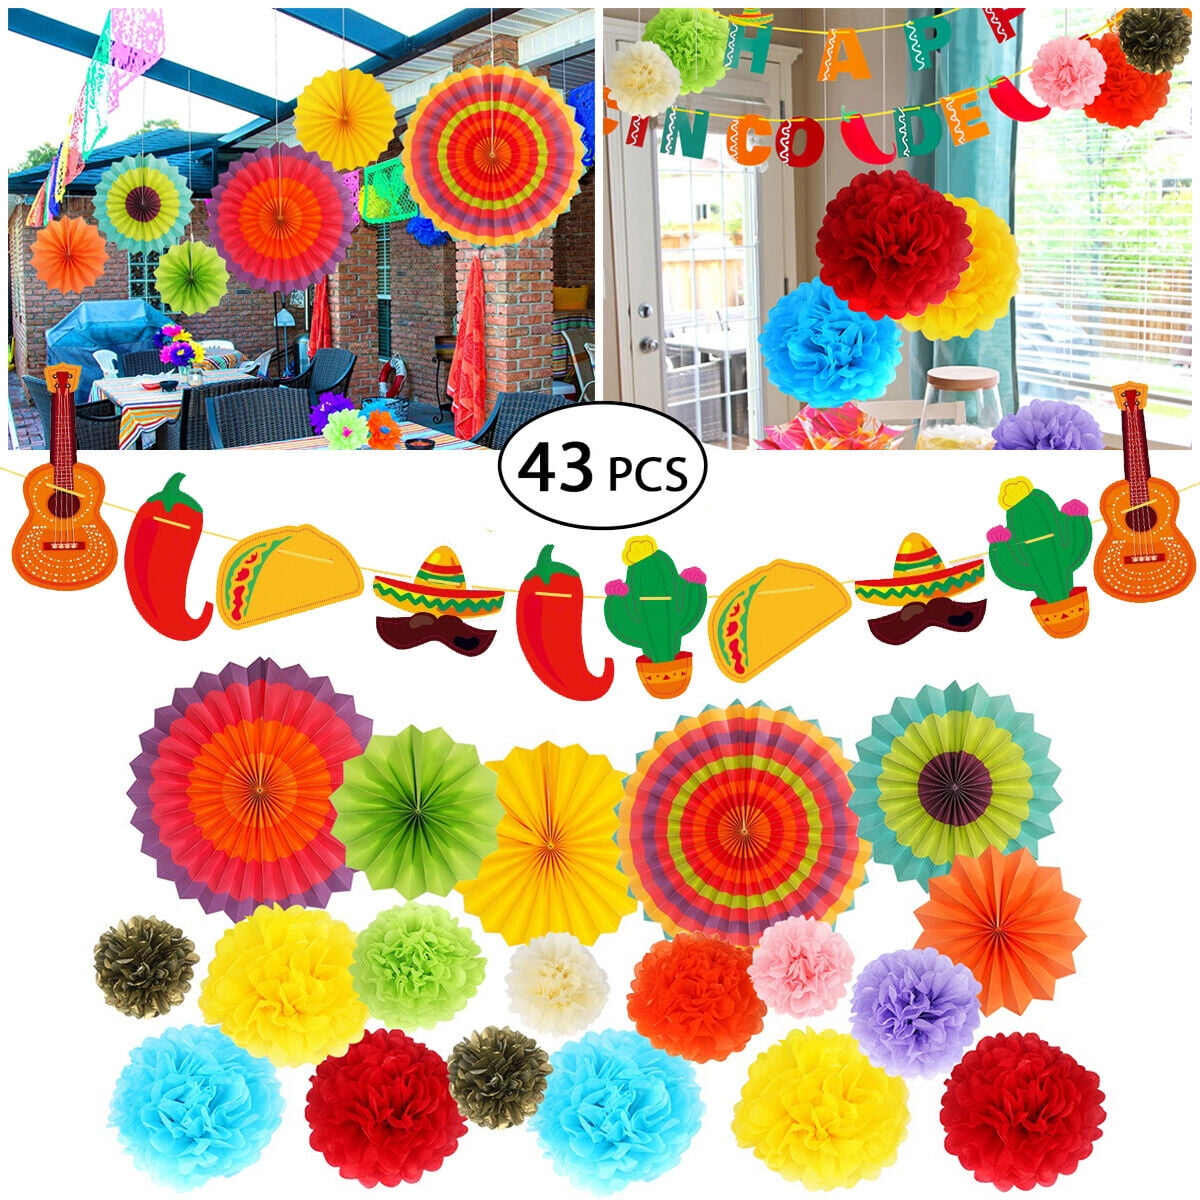 35pcs Fiesta Paper Fan Party Decorations Set - Cinco de Mayo Pom Poms,Pennant,Garland String,Banner,Hanging Swirls Decor SuppliesMulticolored), Size